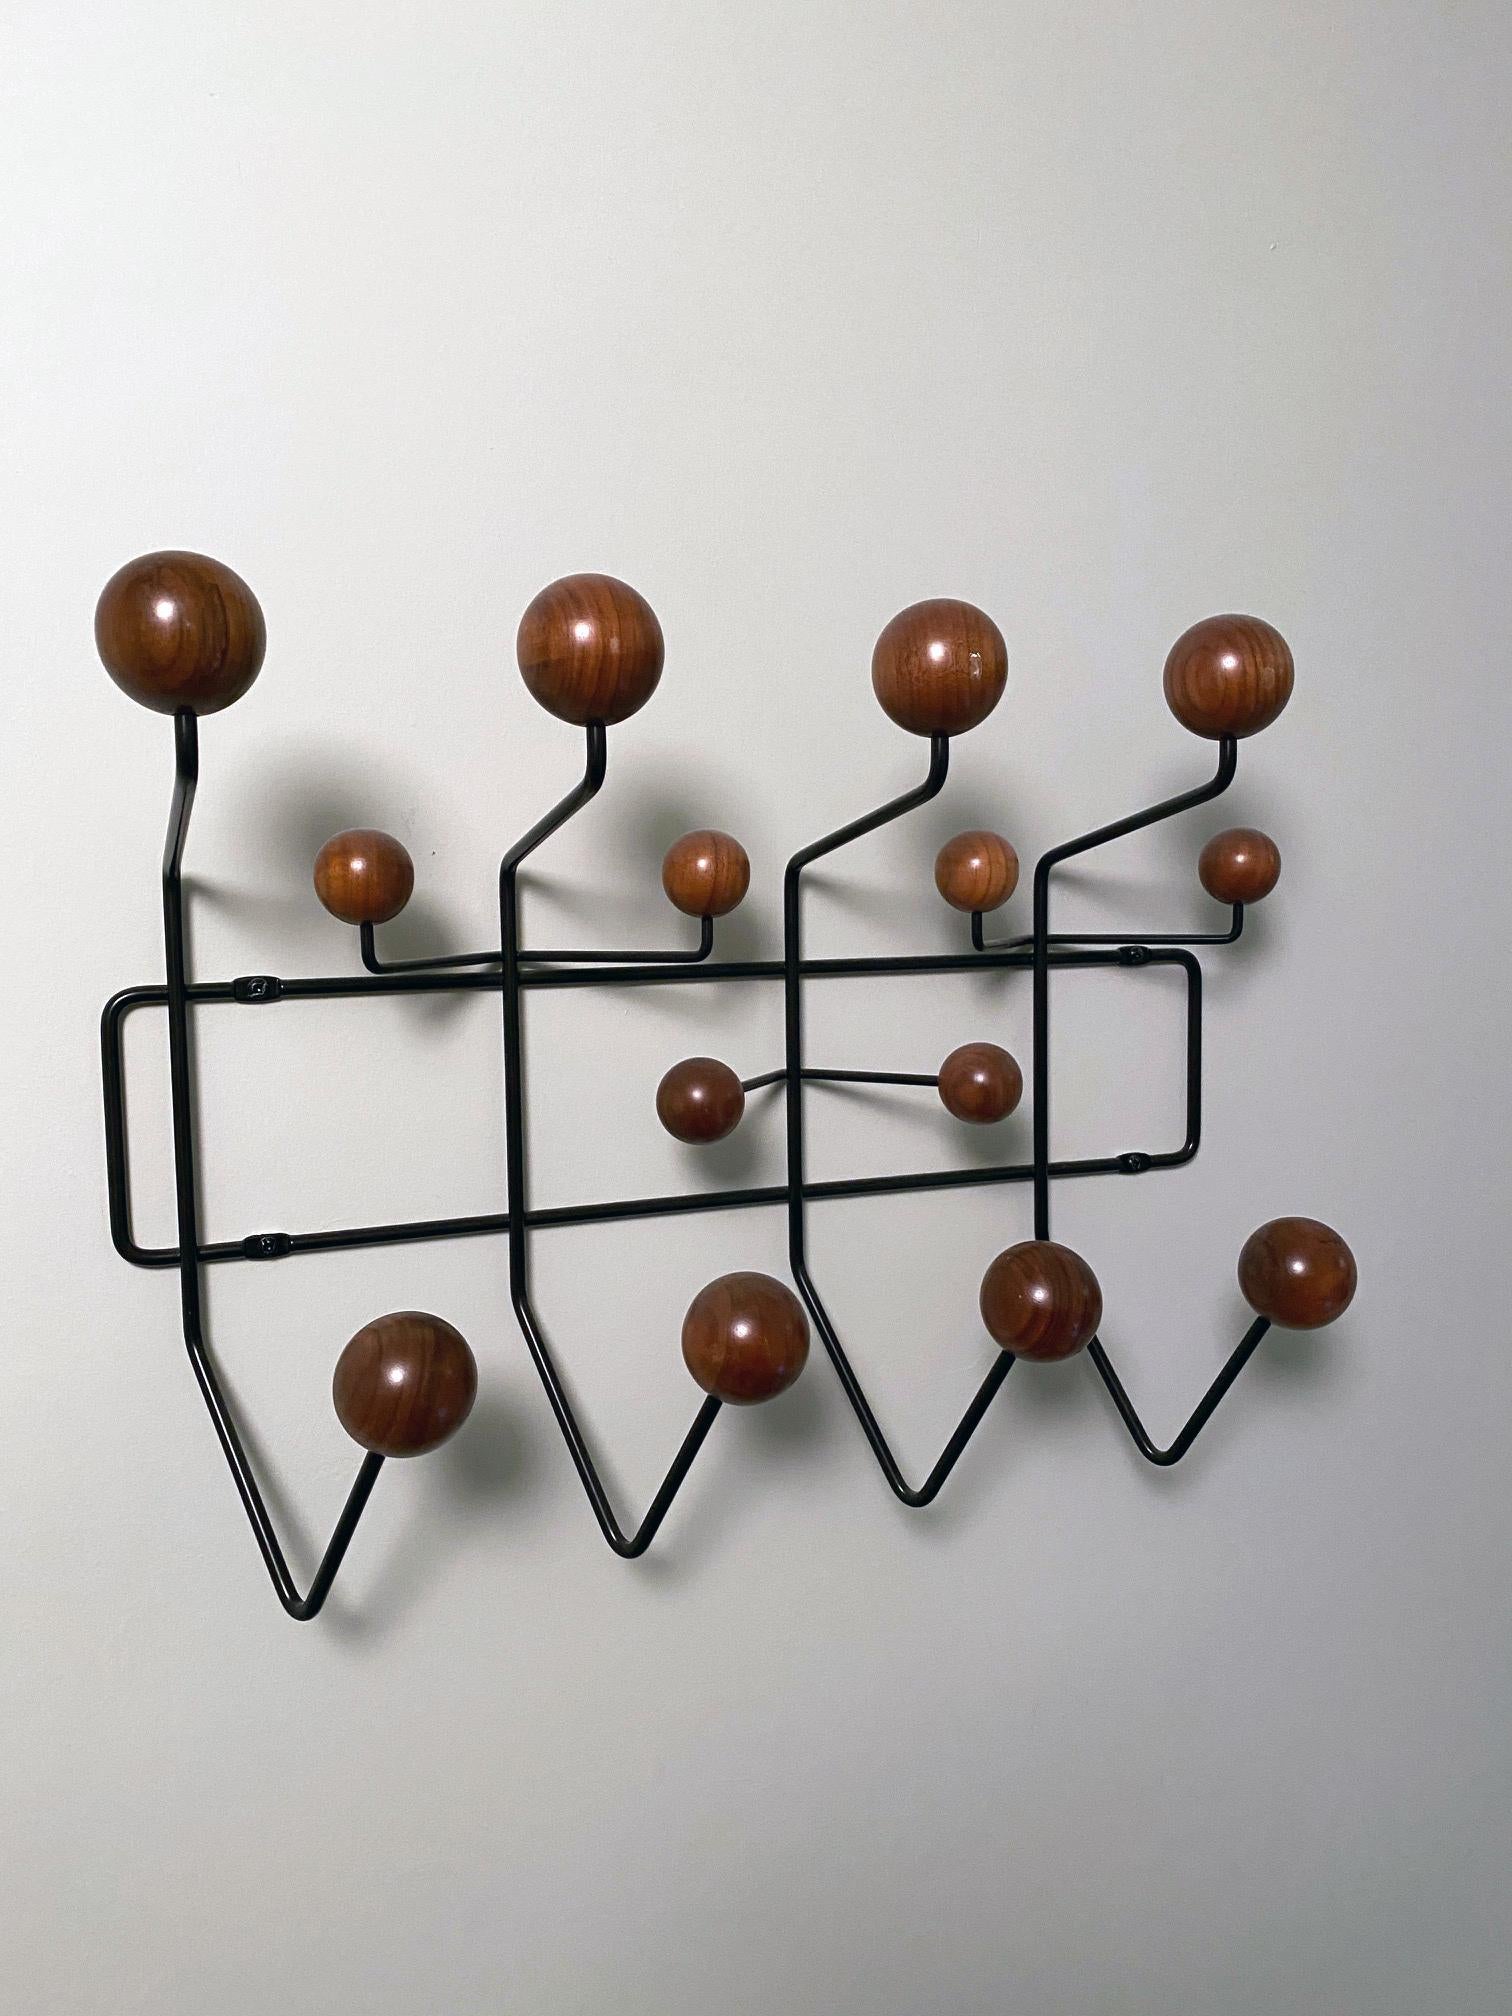 Eames Hang-It-All Designed by Charles and Ray Eames, produced by Herman Miller 3